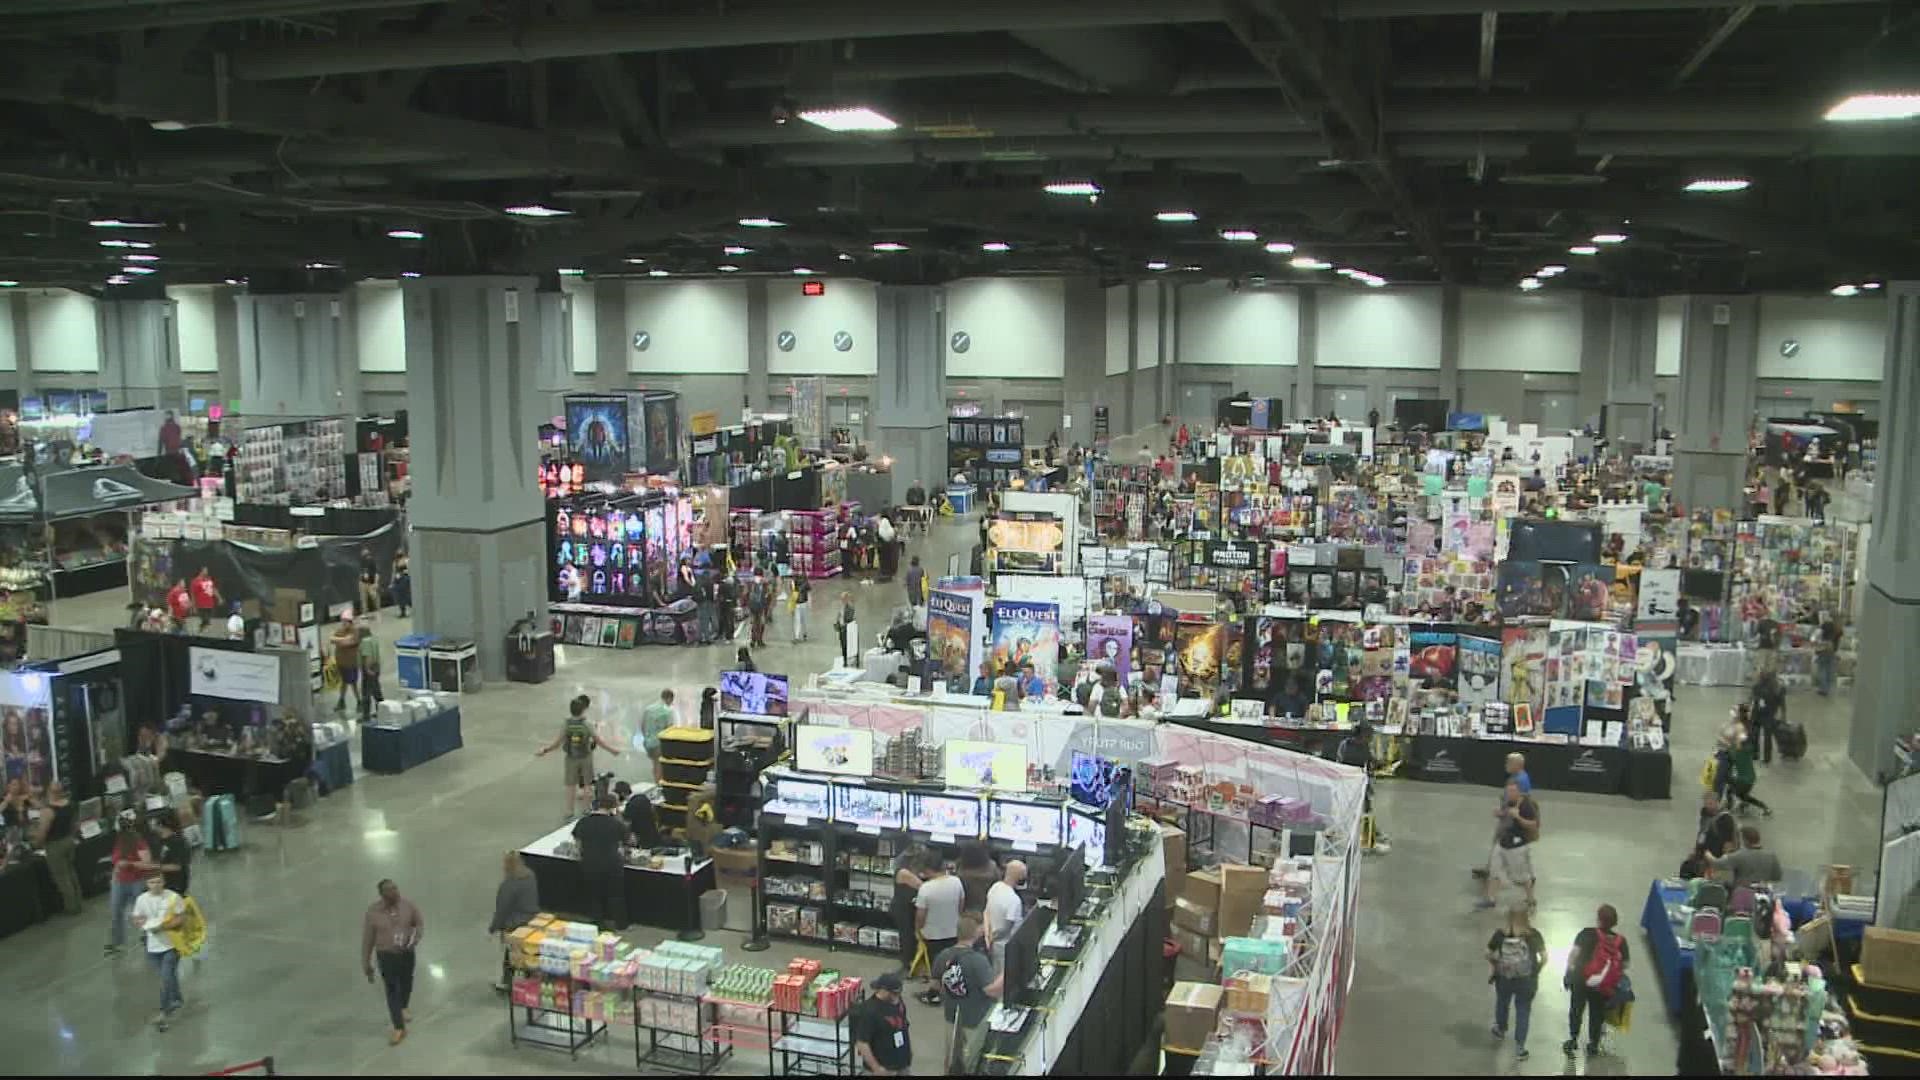 Awesome Con kicks off this weekend in DC with thousands of fans